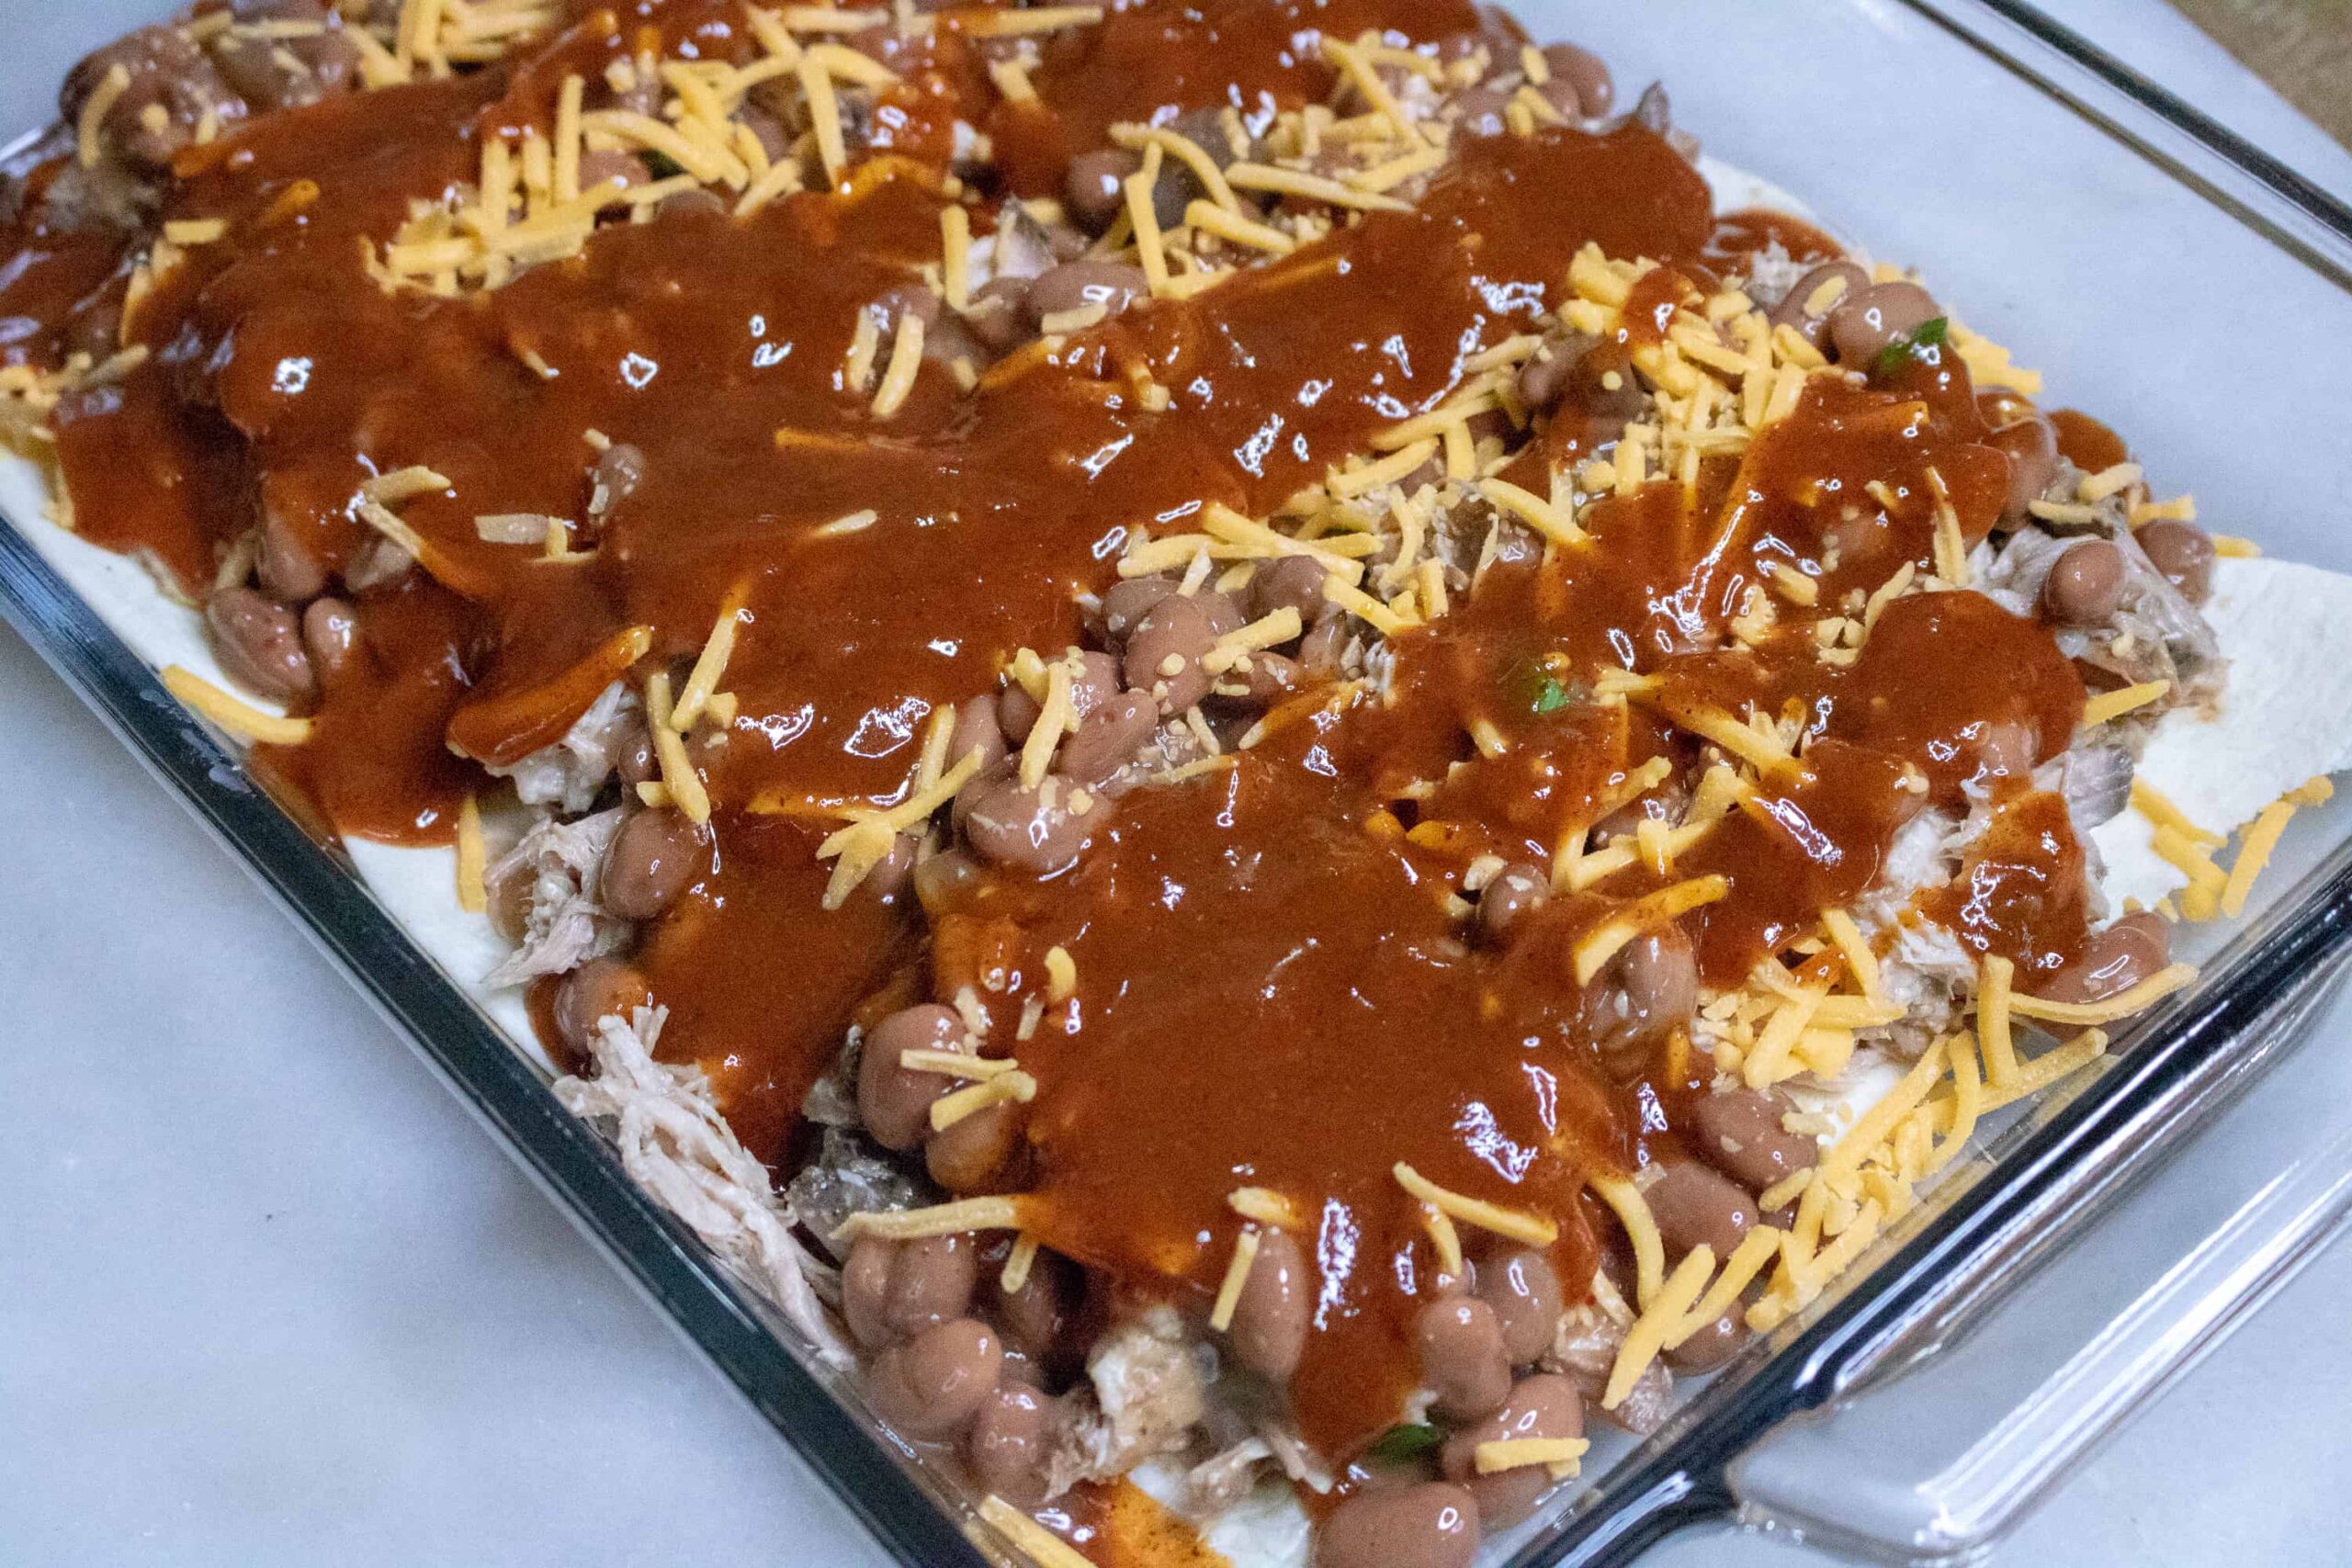 Pork Enchilada Casserole with assembled with all ingredients ready to be put into oven.